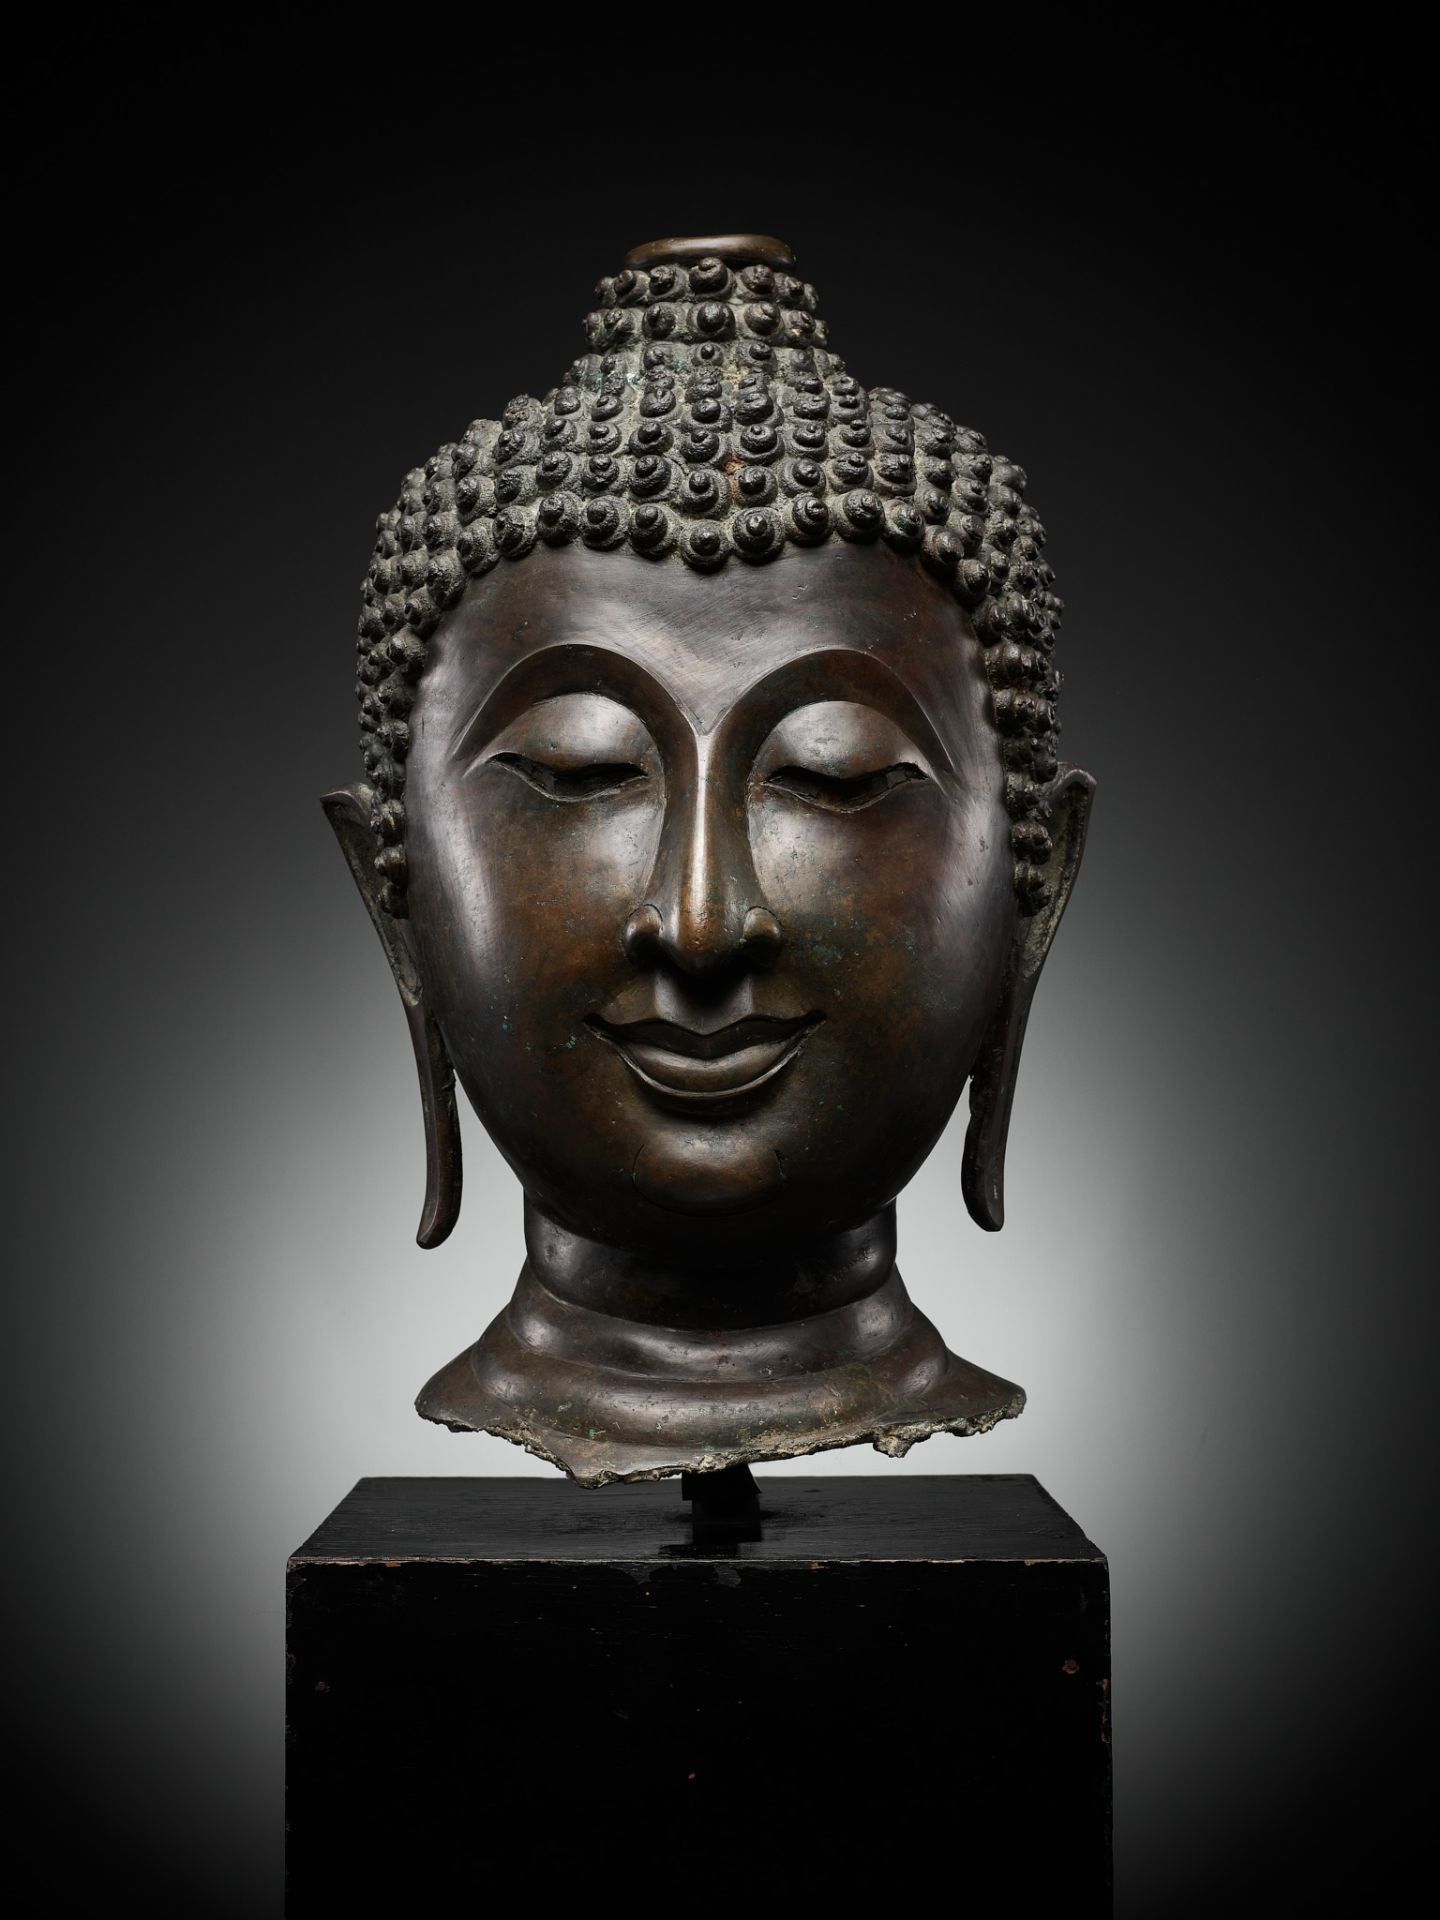 A MONUMENTAL BRONZE HEAD OF BUDDHA, LAN NA, NORTHERN THAILAND, 14TH-15th CENTURY - Image 16 of 16